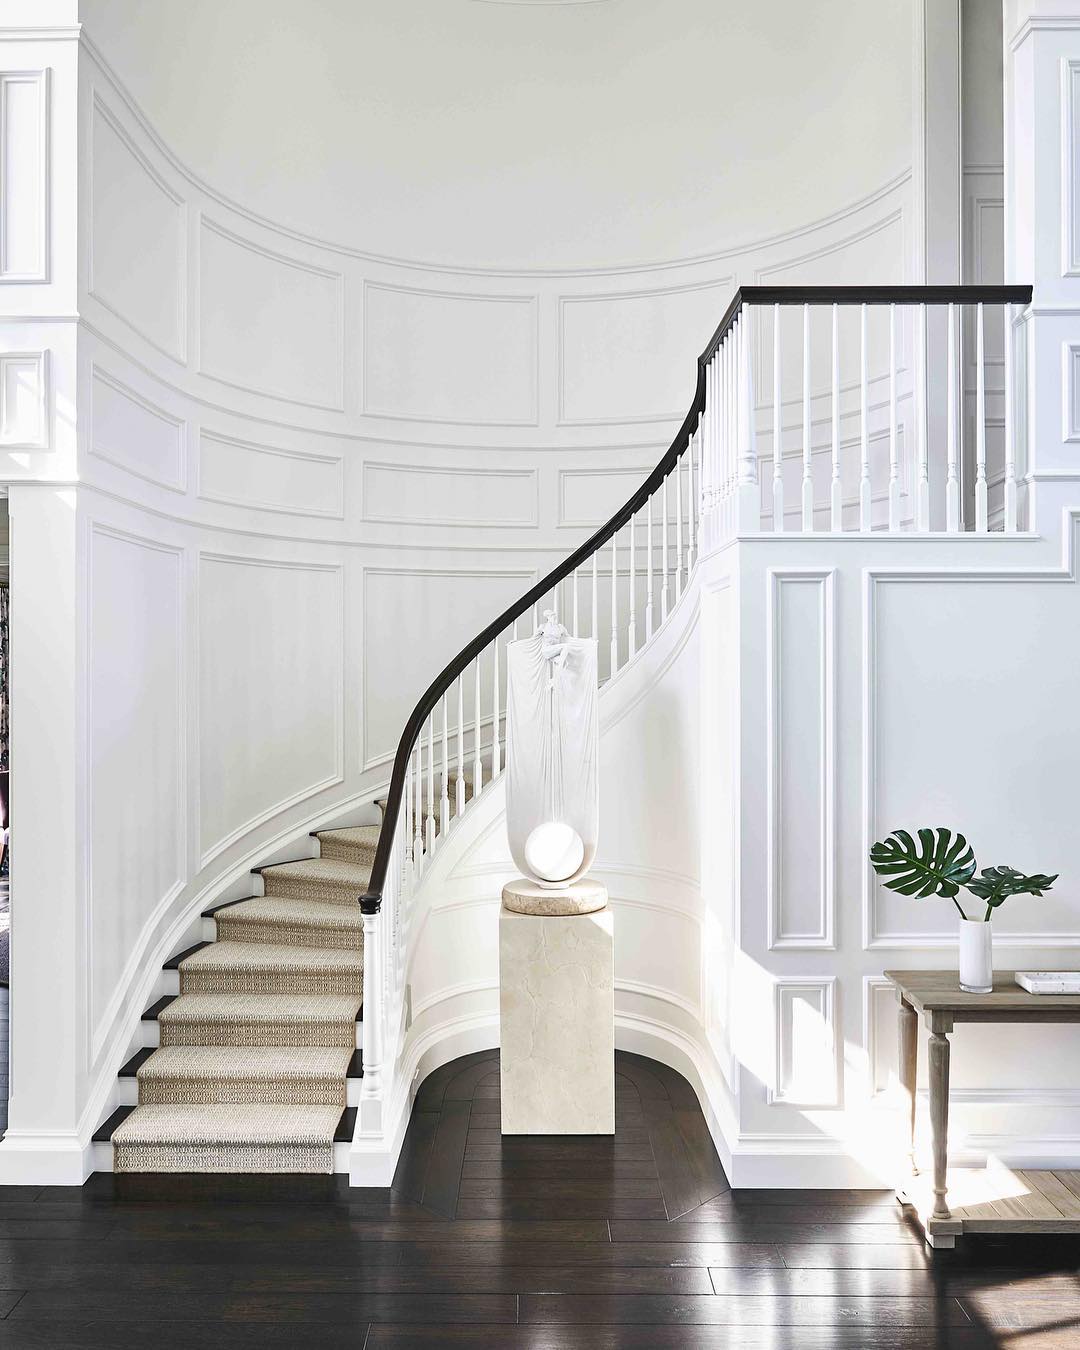 White entryway with a winding staircase and dark wood floors and features. Photo by instagram user @gazette_peninsula